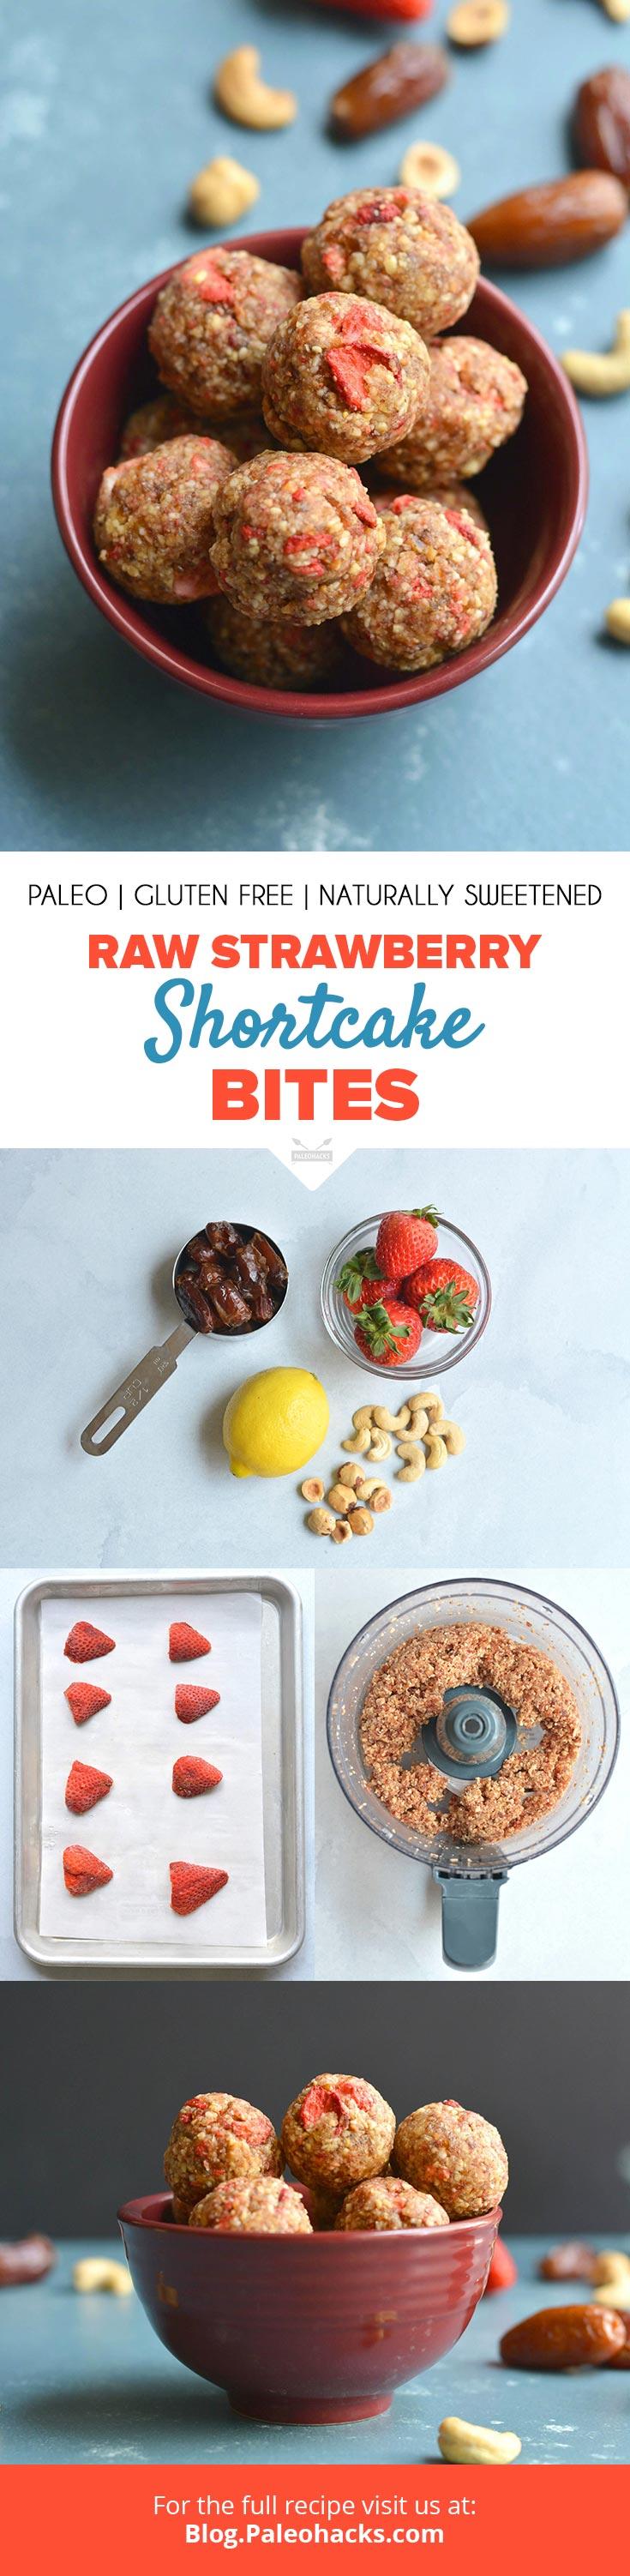 Anyone else ready for warm-weather snacking? Indulge in these Strawberry Shortcake Bites for a light treat made with only 5 natural ingredients.